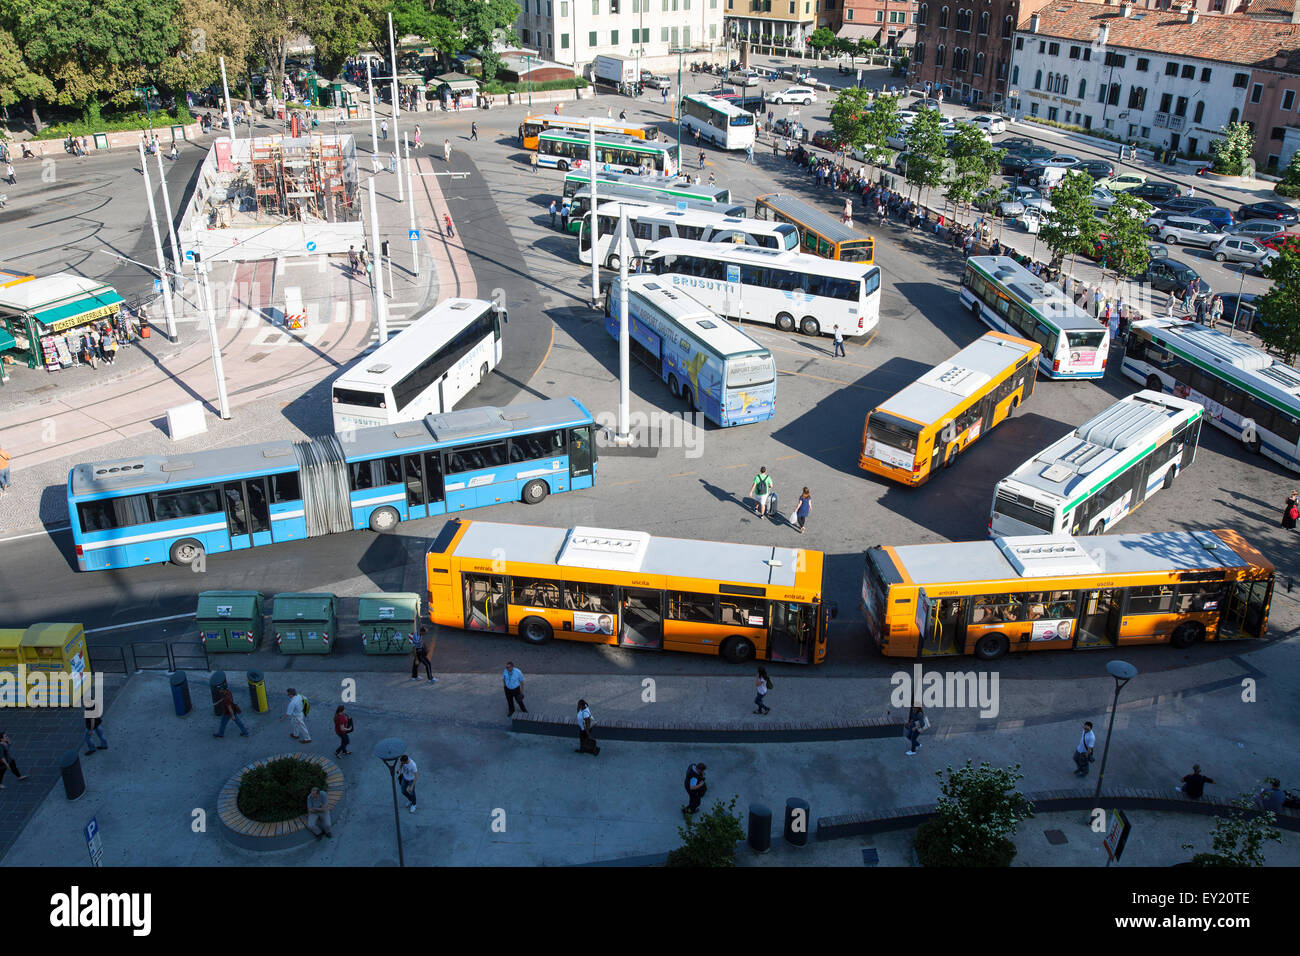 Central Bus Station, Piazzale Roma, Venice on May 18, 2015. (CTK Photo/Krystof Kriz) Stock Photo